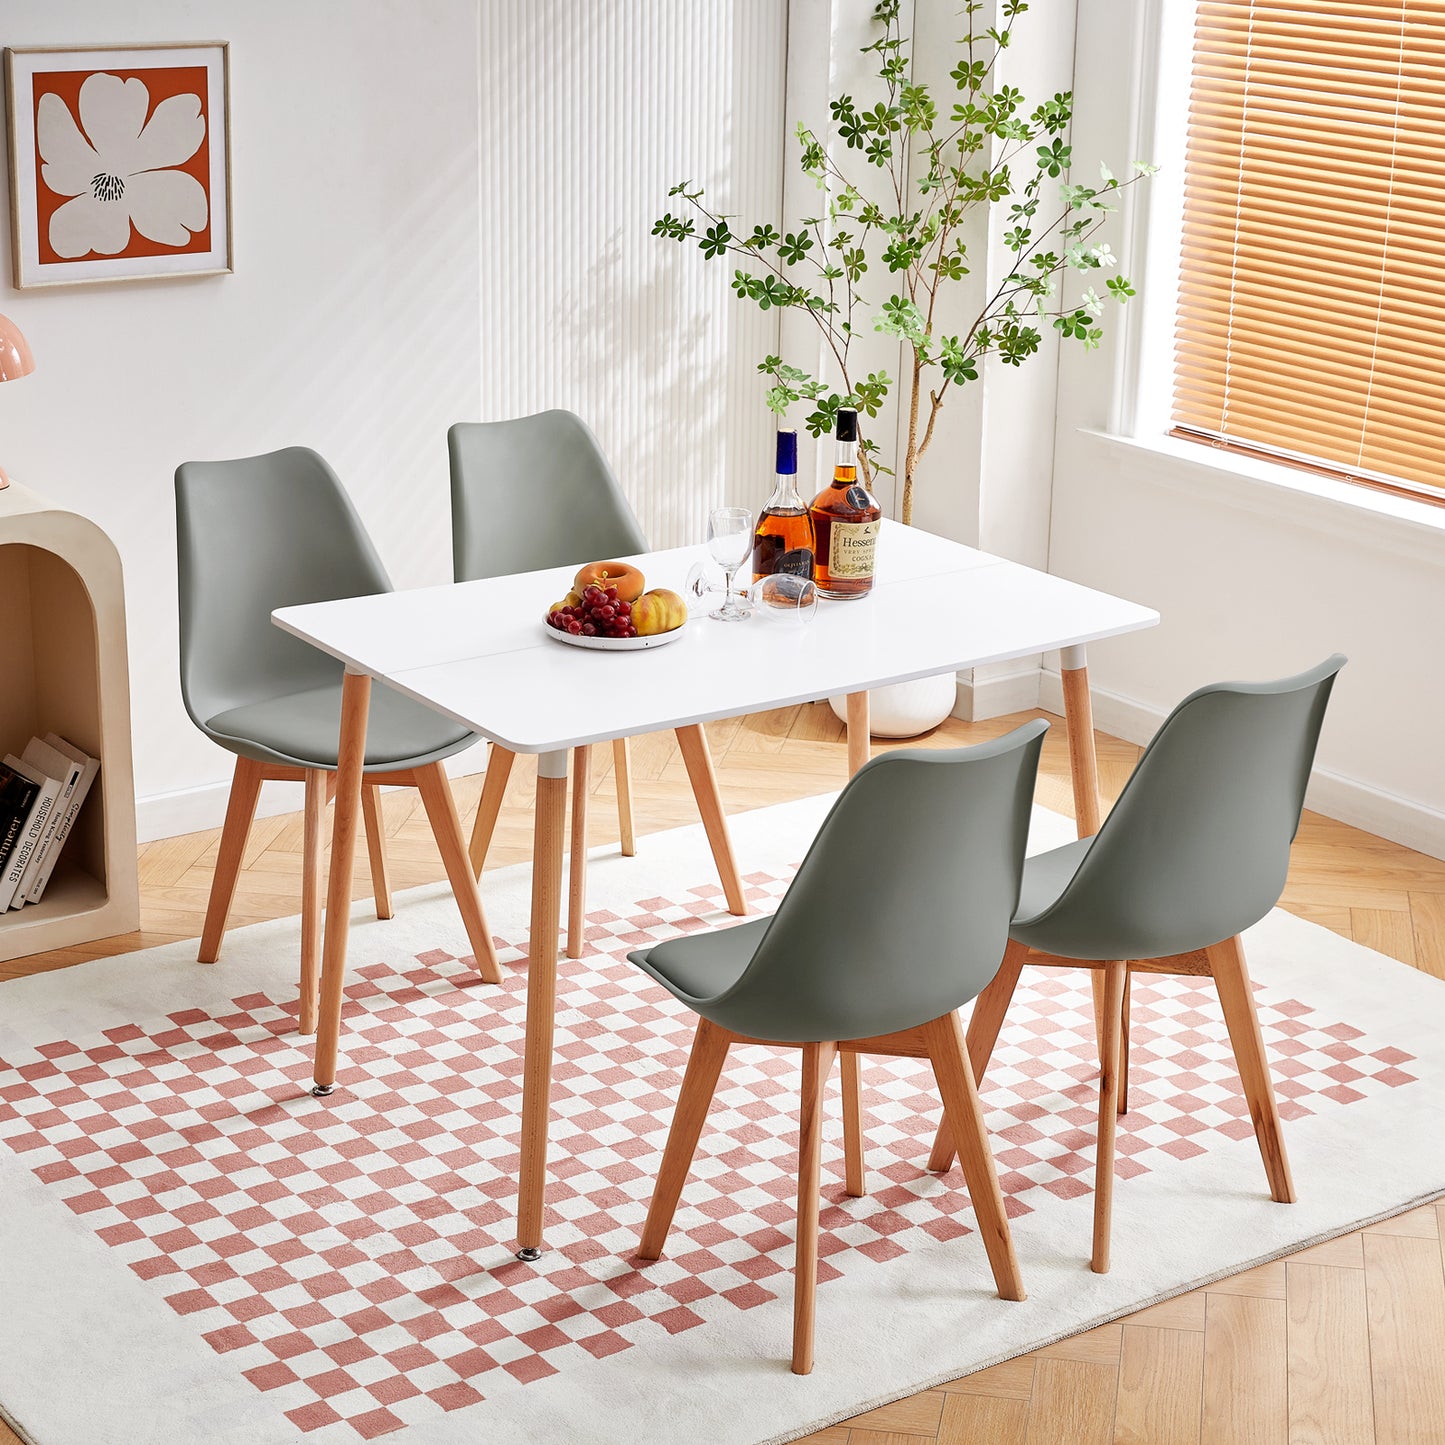 SAGE 110cm Splicing Dining Table With Beech Legs-White